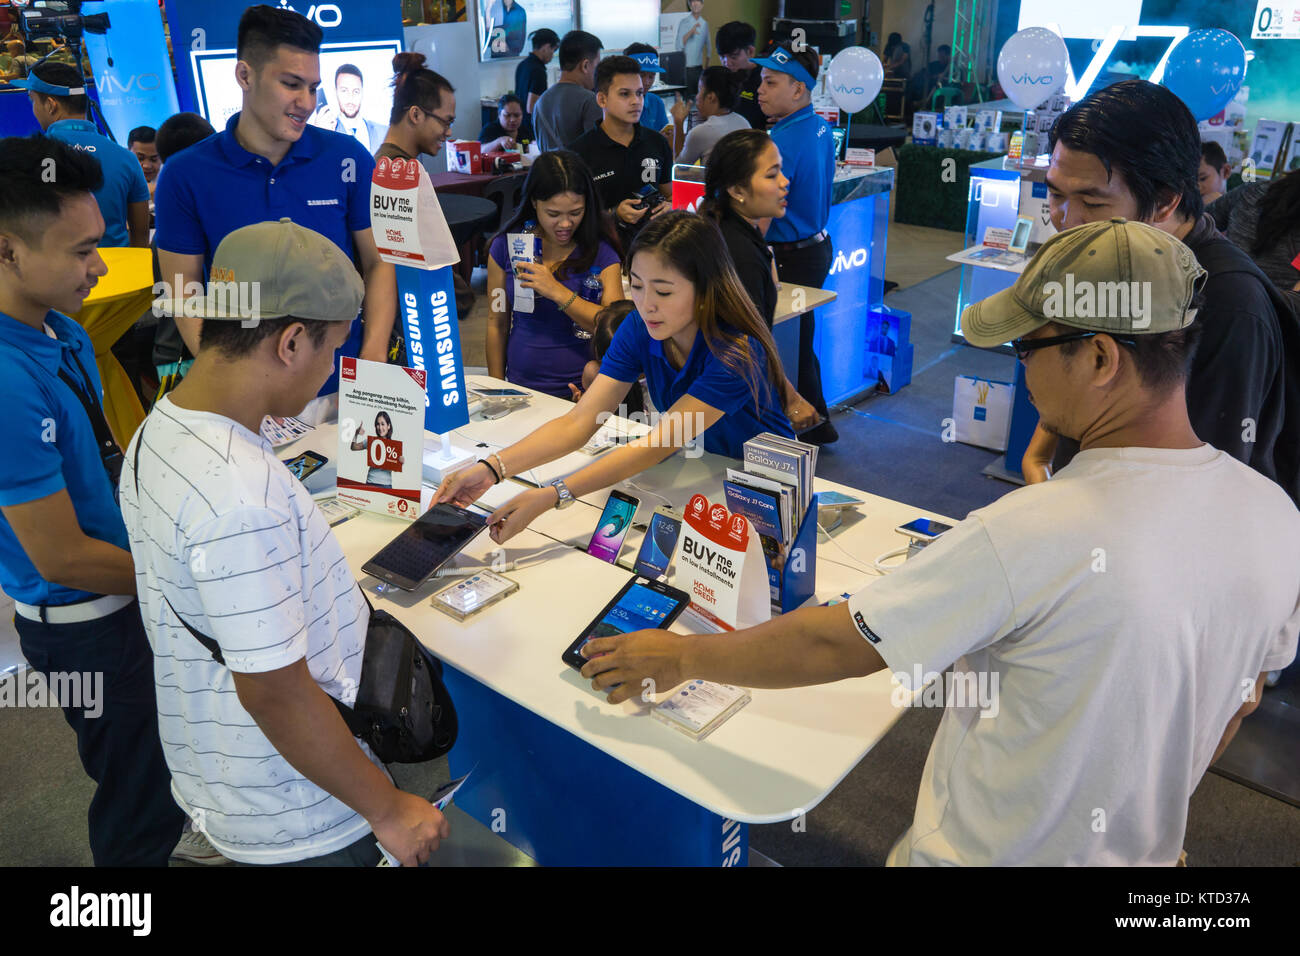 Mobile Phones & Electronics being sold at a samsung stall within SM City,Cebu,Philippines Stock Photo